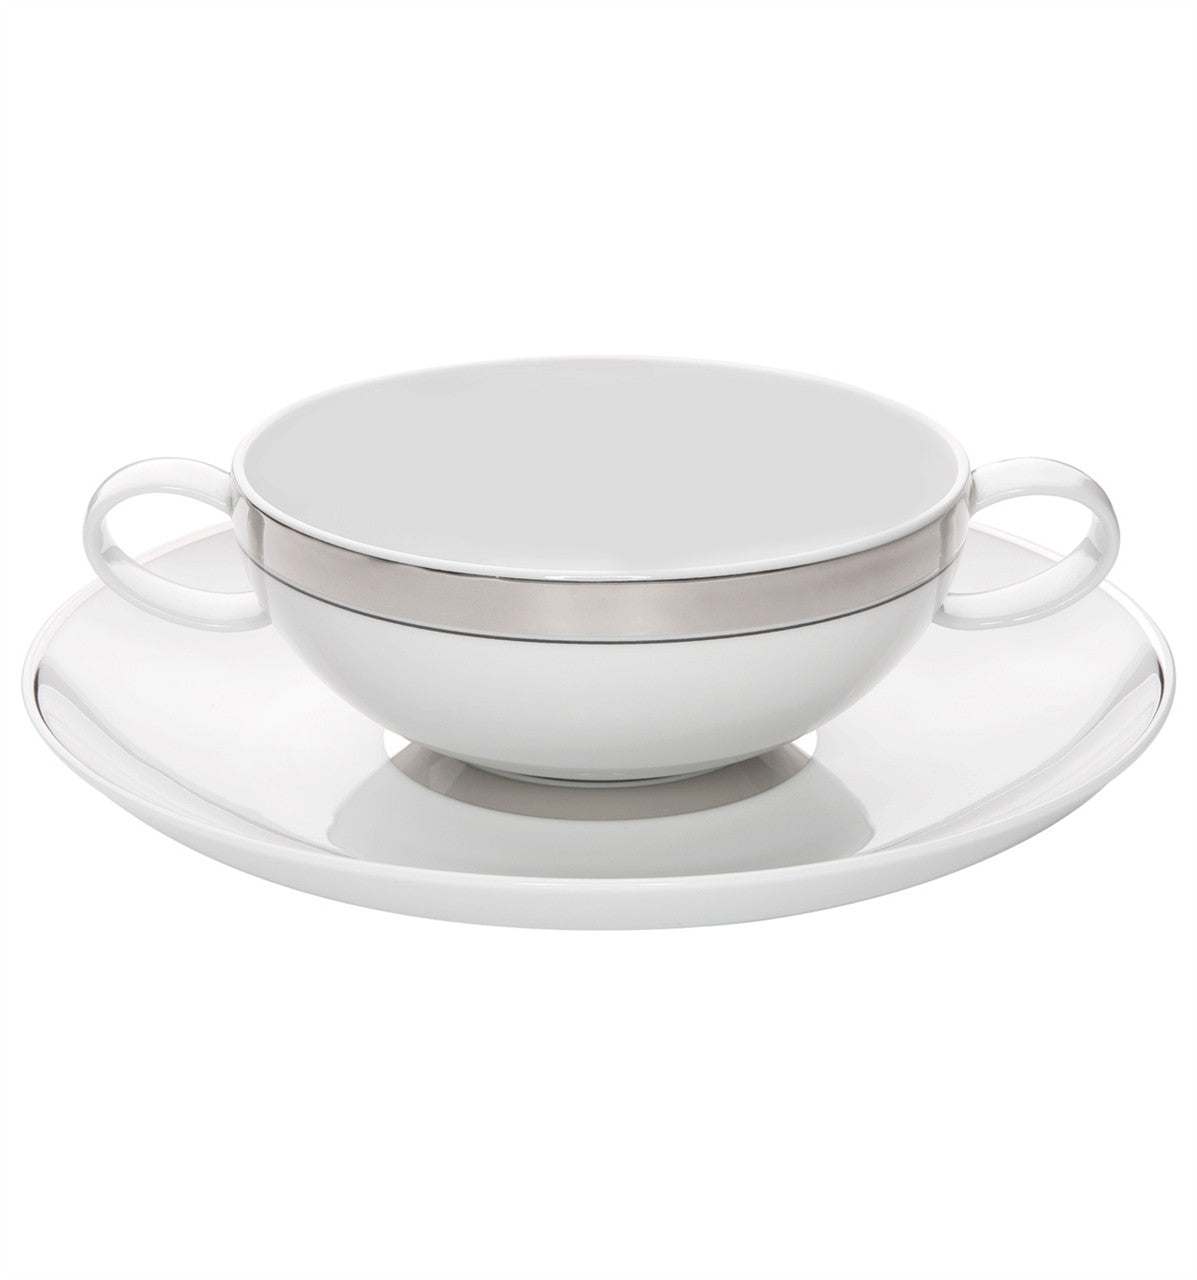 Domo Platina Consomme Cup & Saucer - RSVP Style